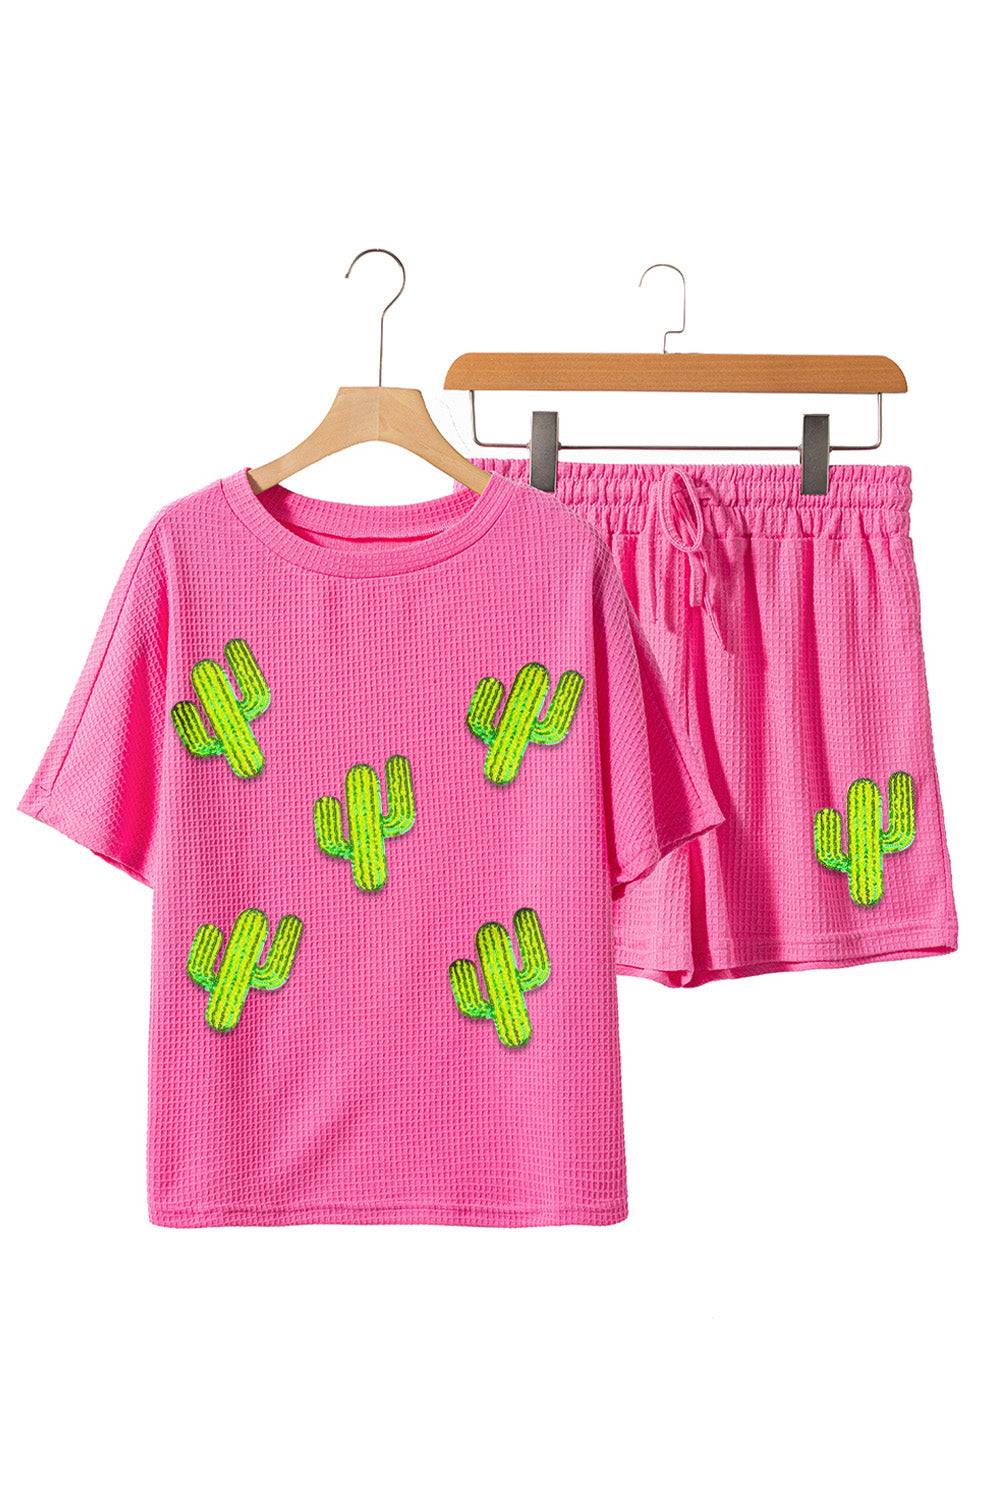 a pink shirt and shorts with green cactus designs